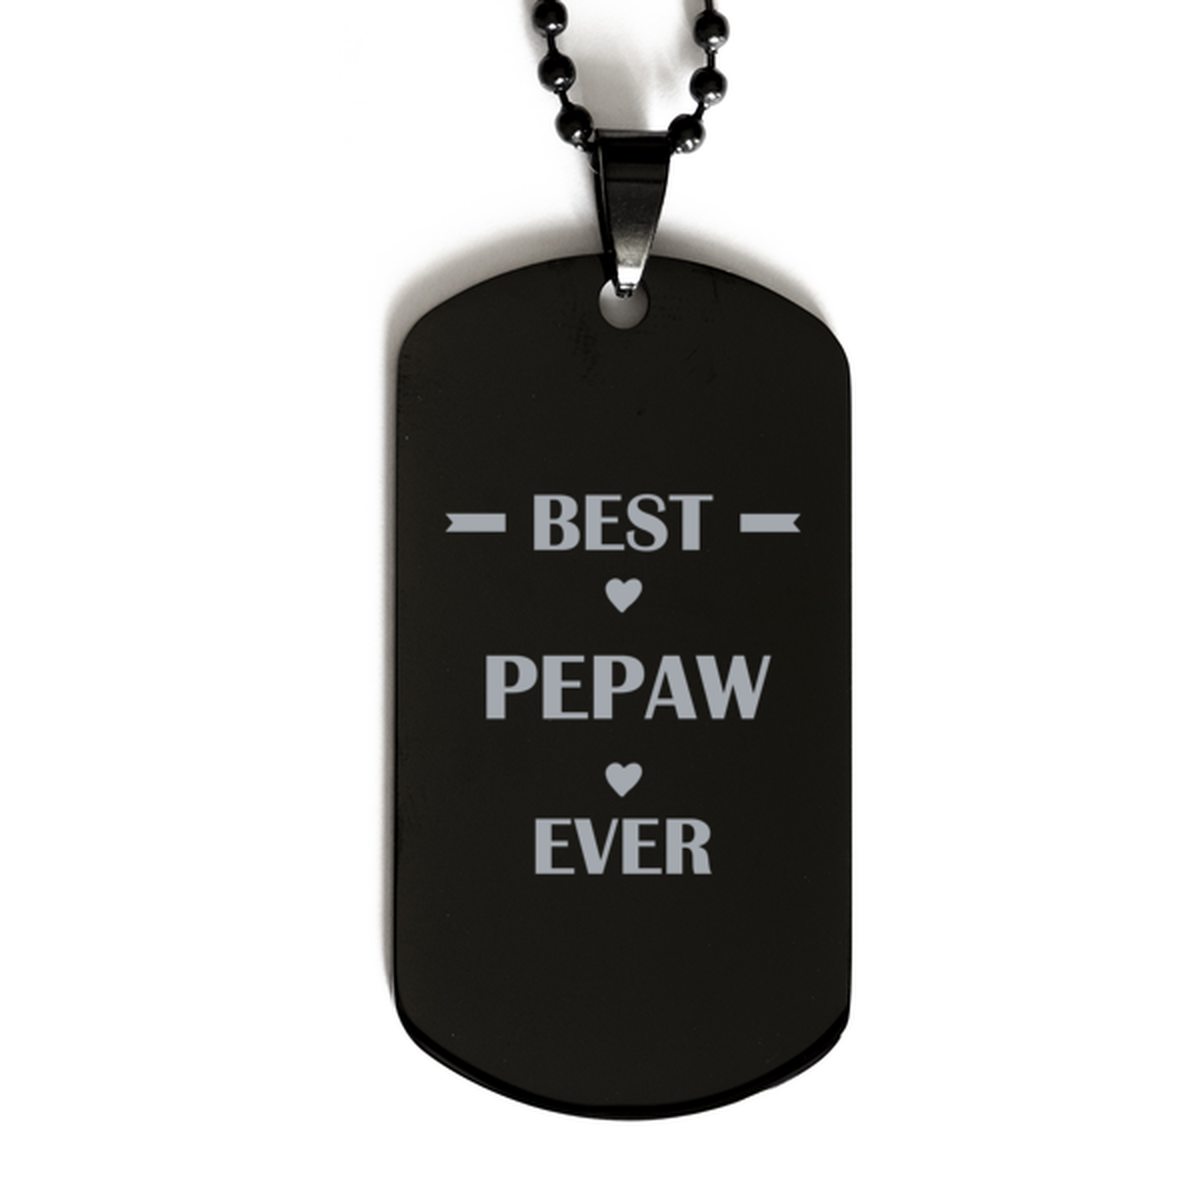 Best Pepaw Ever Pepaw Gifts, Funny Black Dog Tag For Pepaw, Birthday Family Presents Engraved Necklace For Men